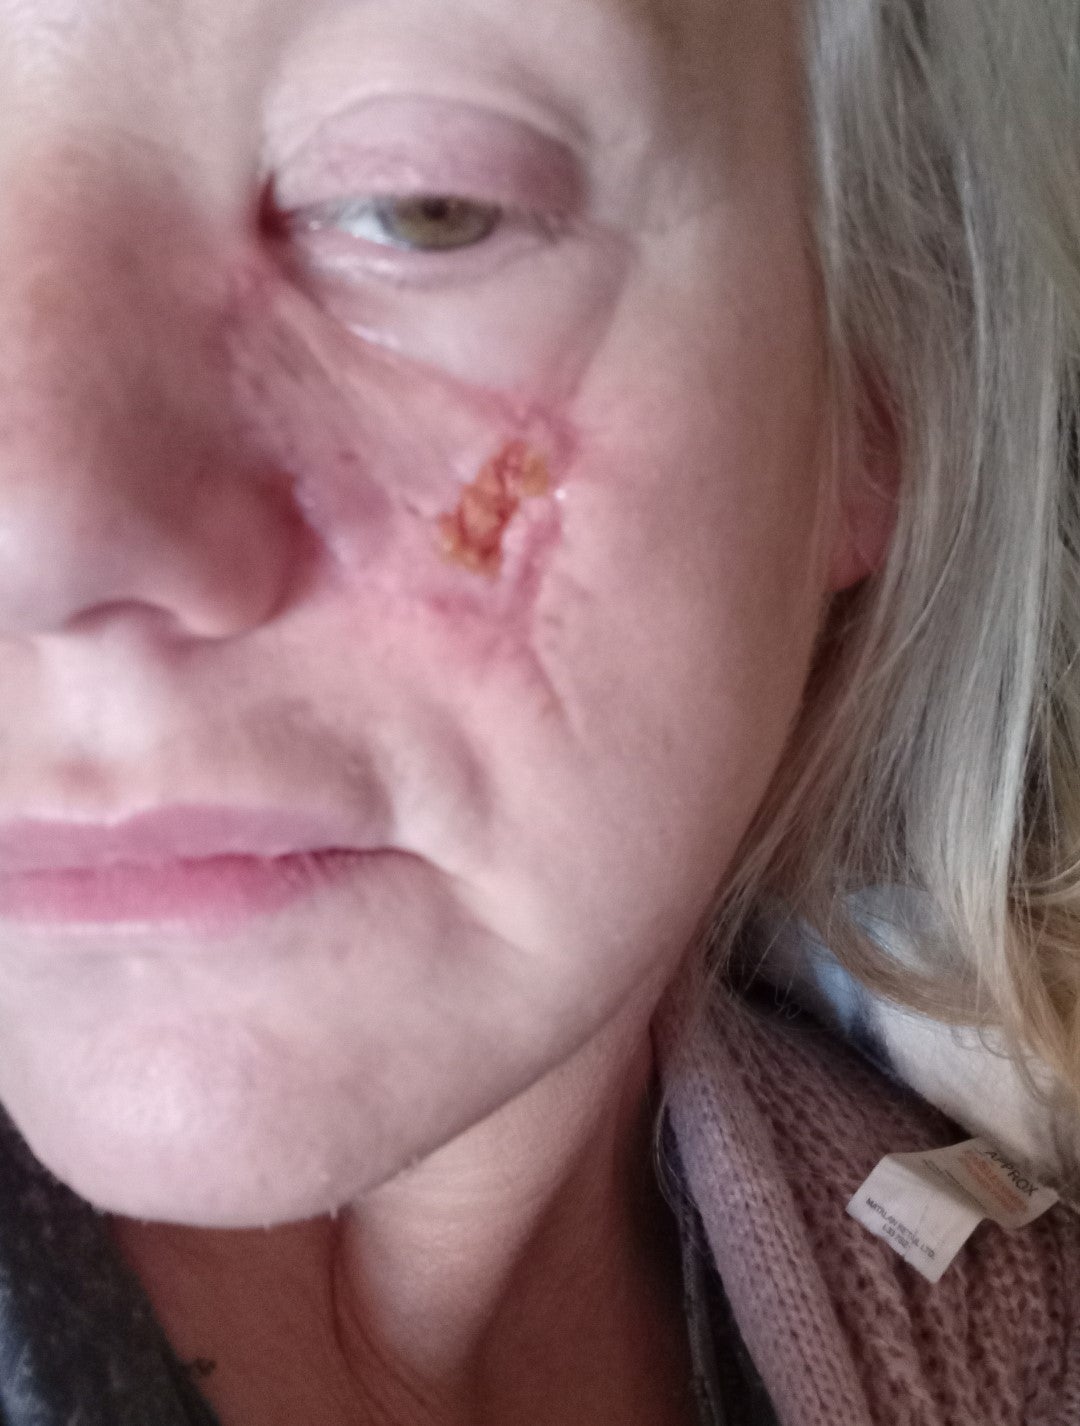 Kelly her self-esteem has been ‘absolutely destroyed’ by the scar the dog left on her face (Collect/PA Real Life)